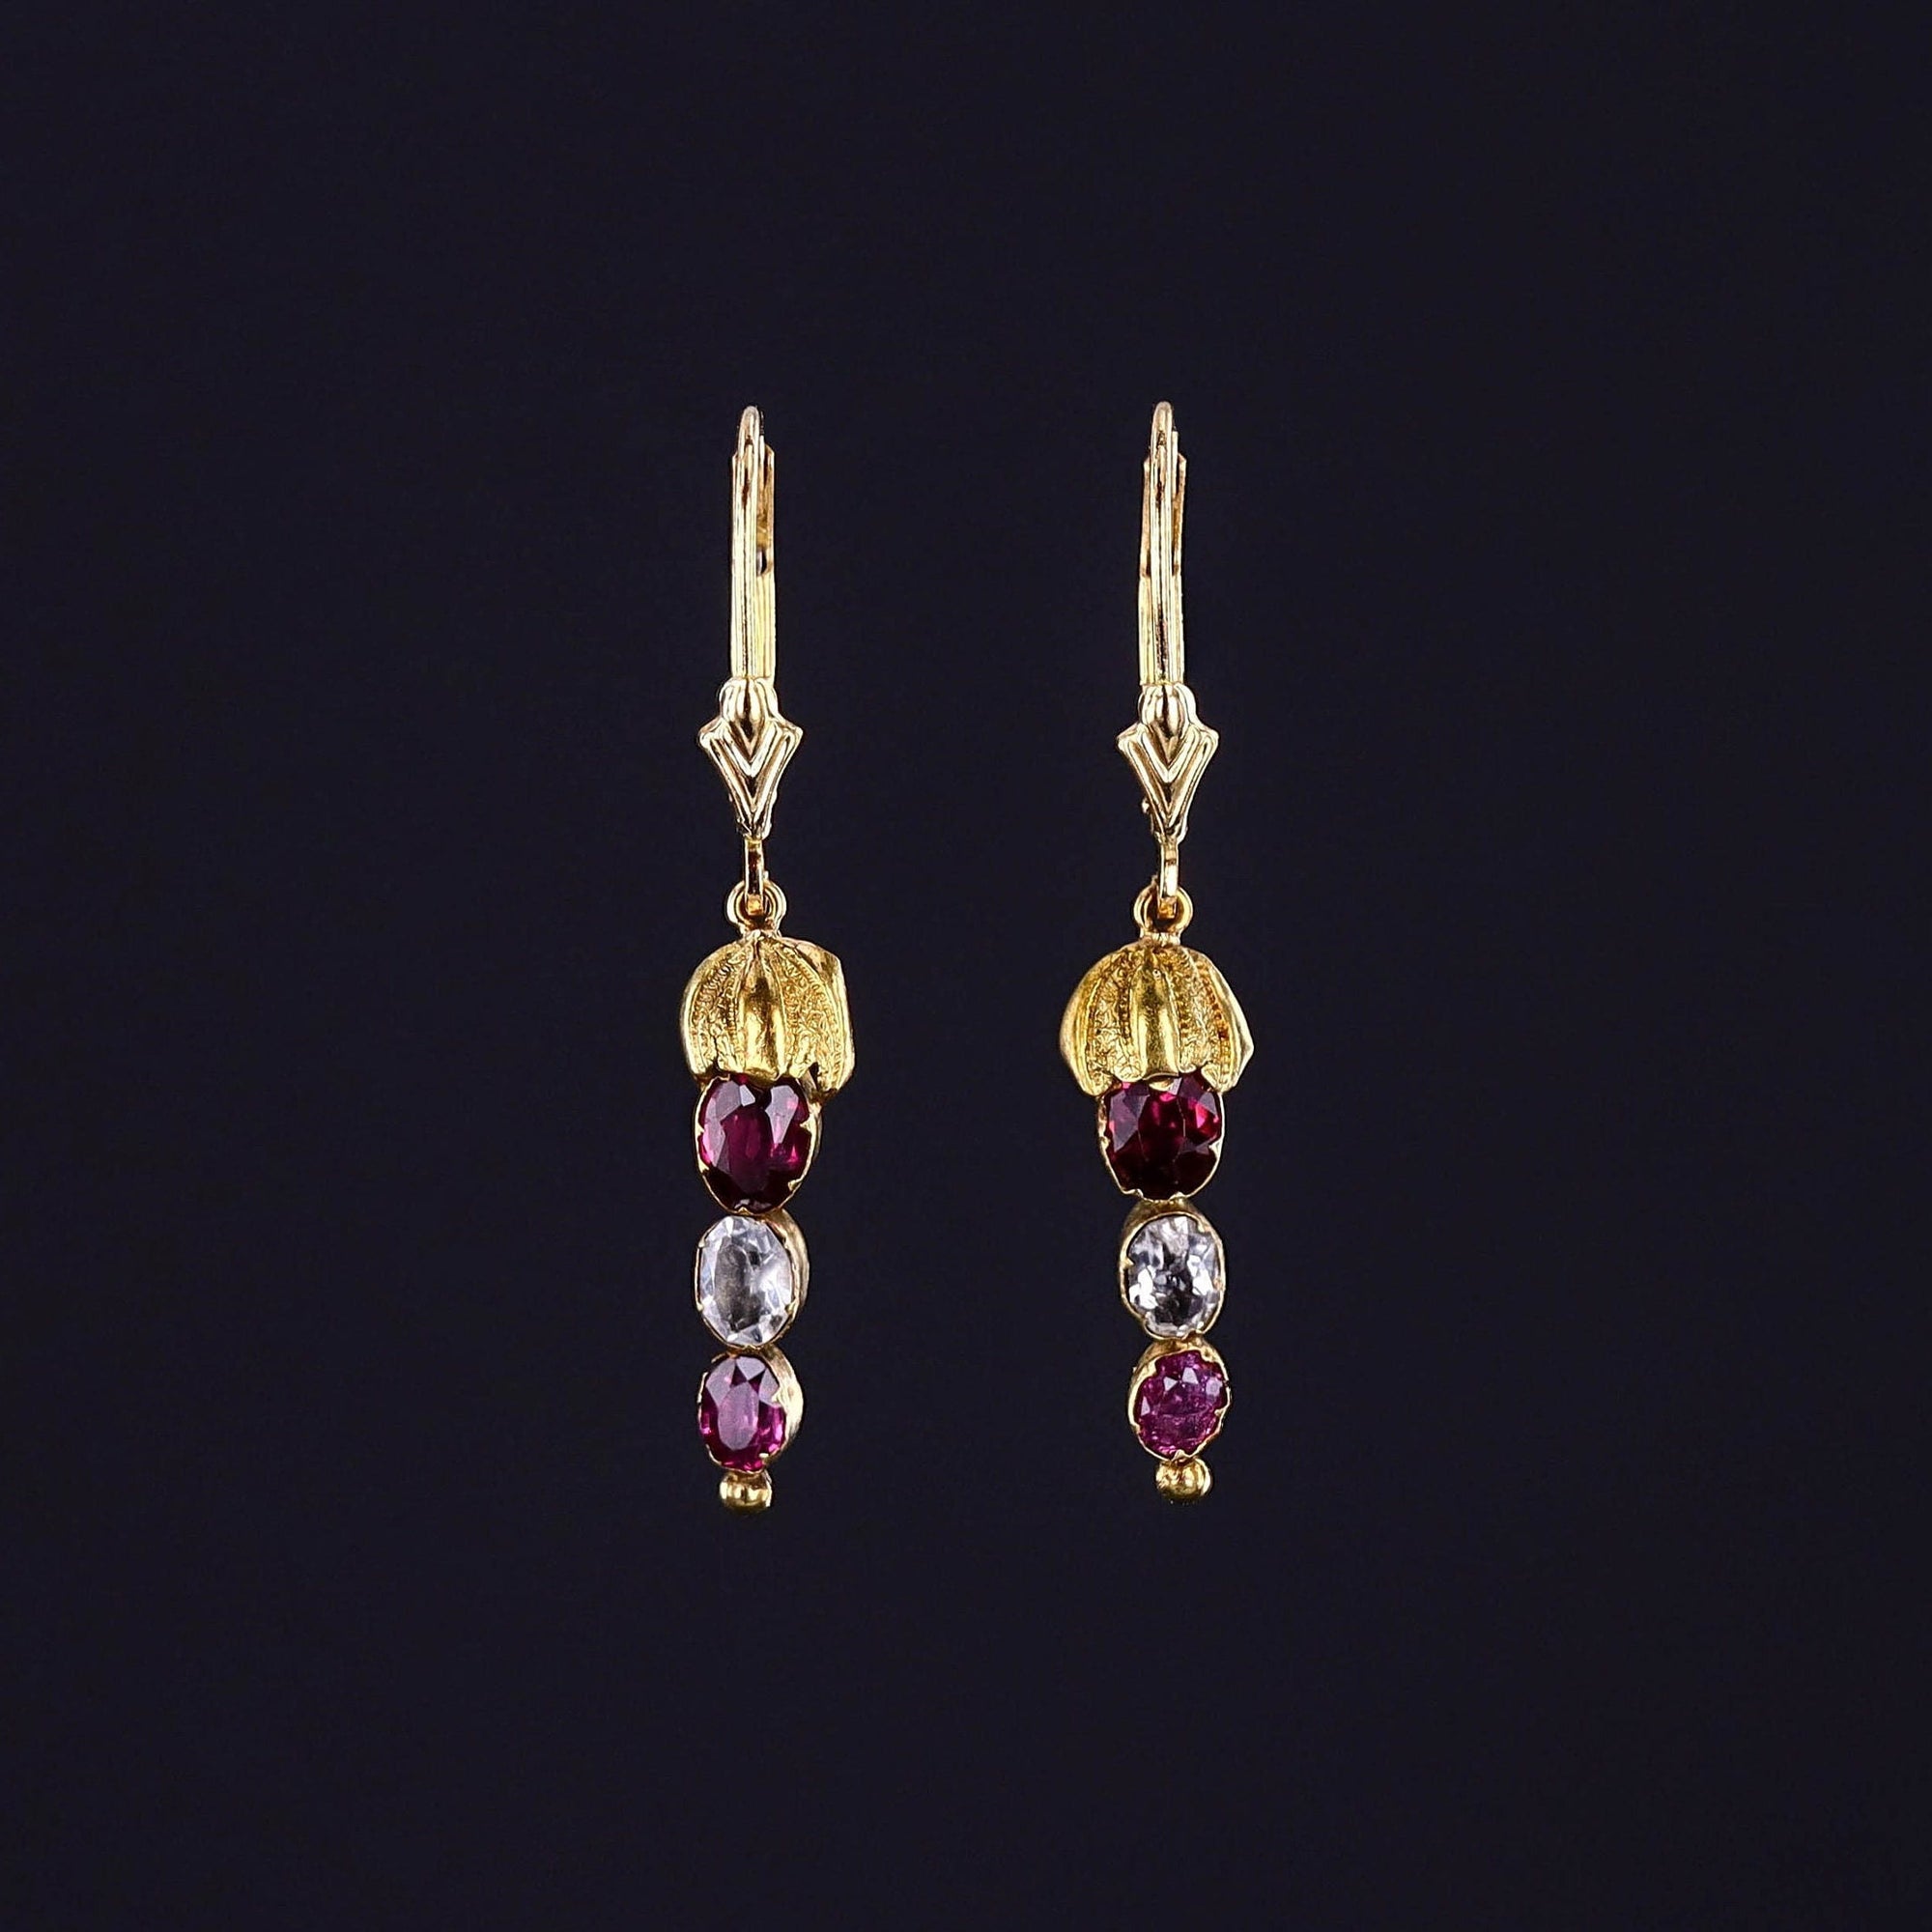 Antique Garnet and Rock Crystal Conversion Earrings of 14k Gold